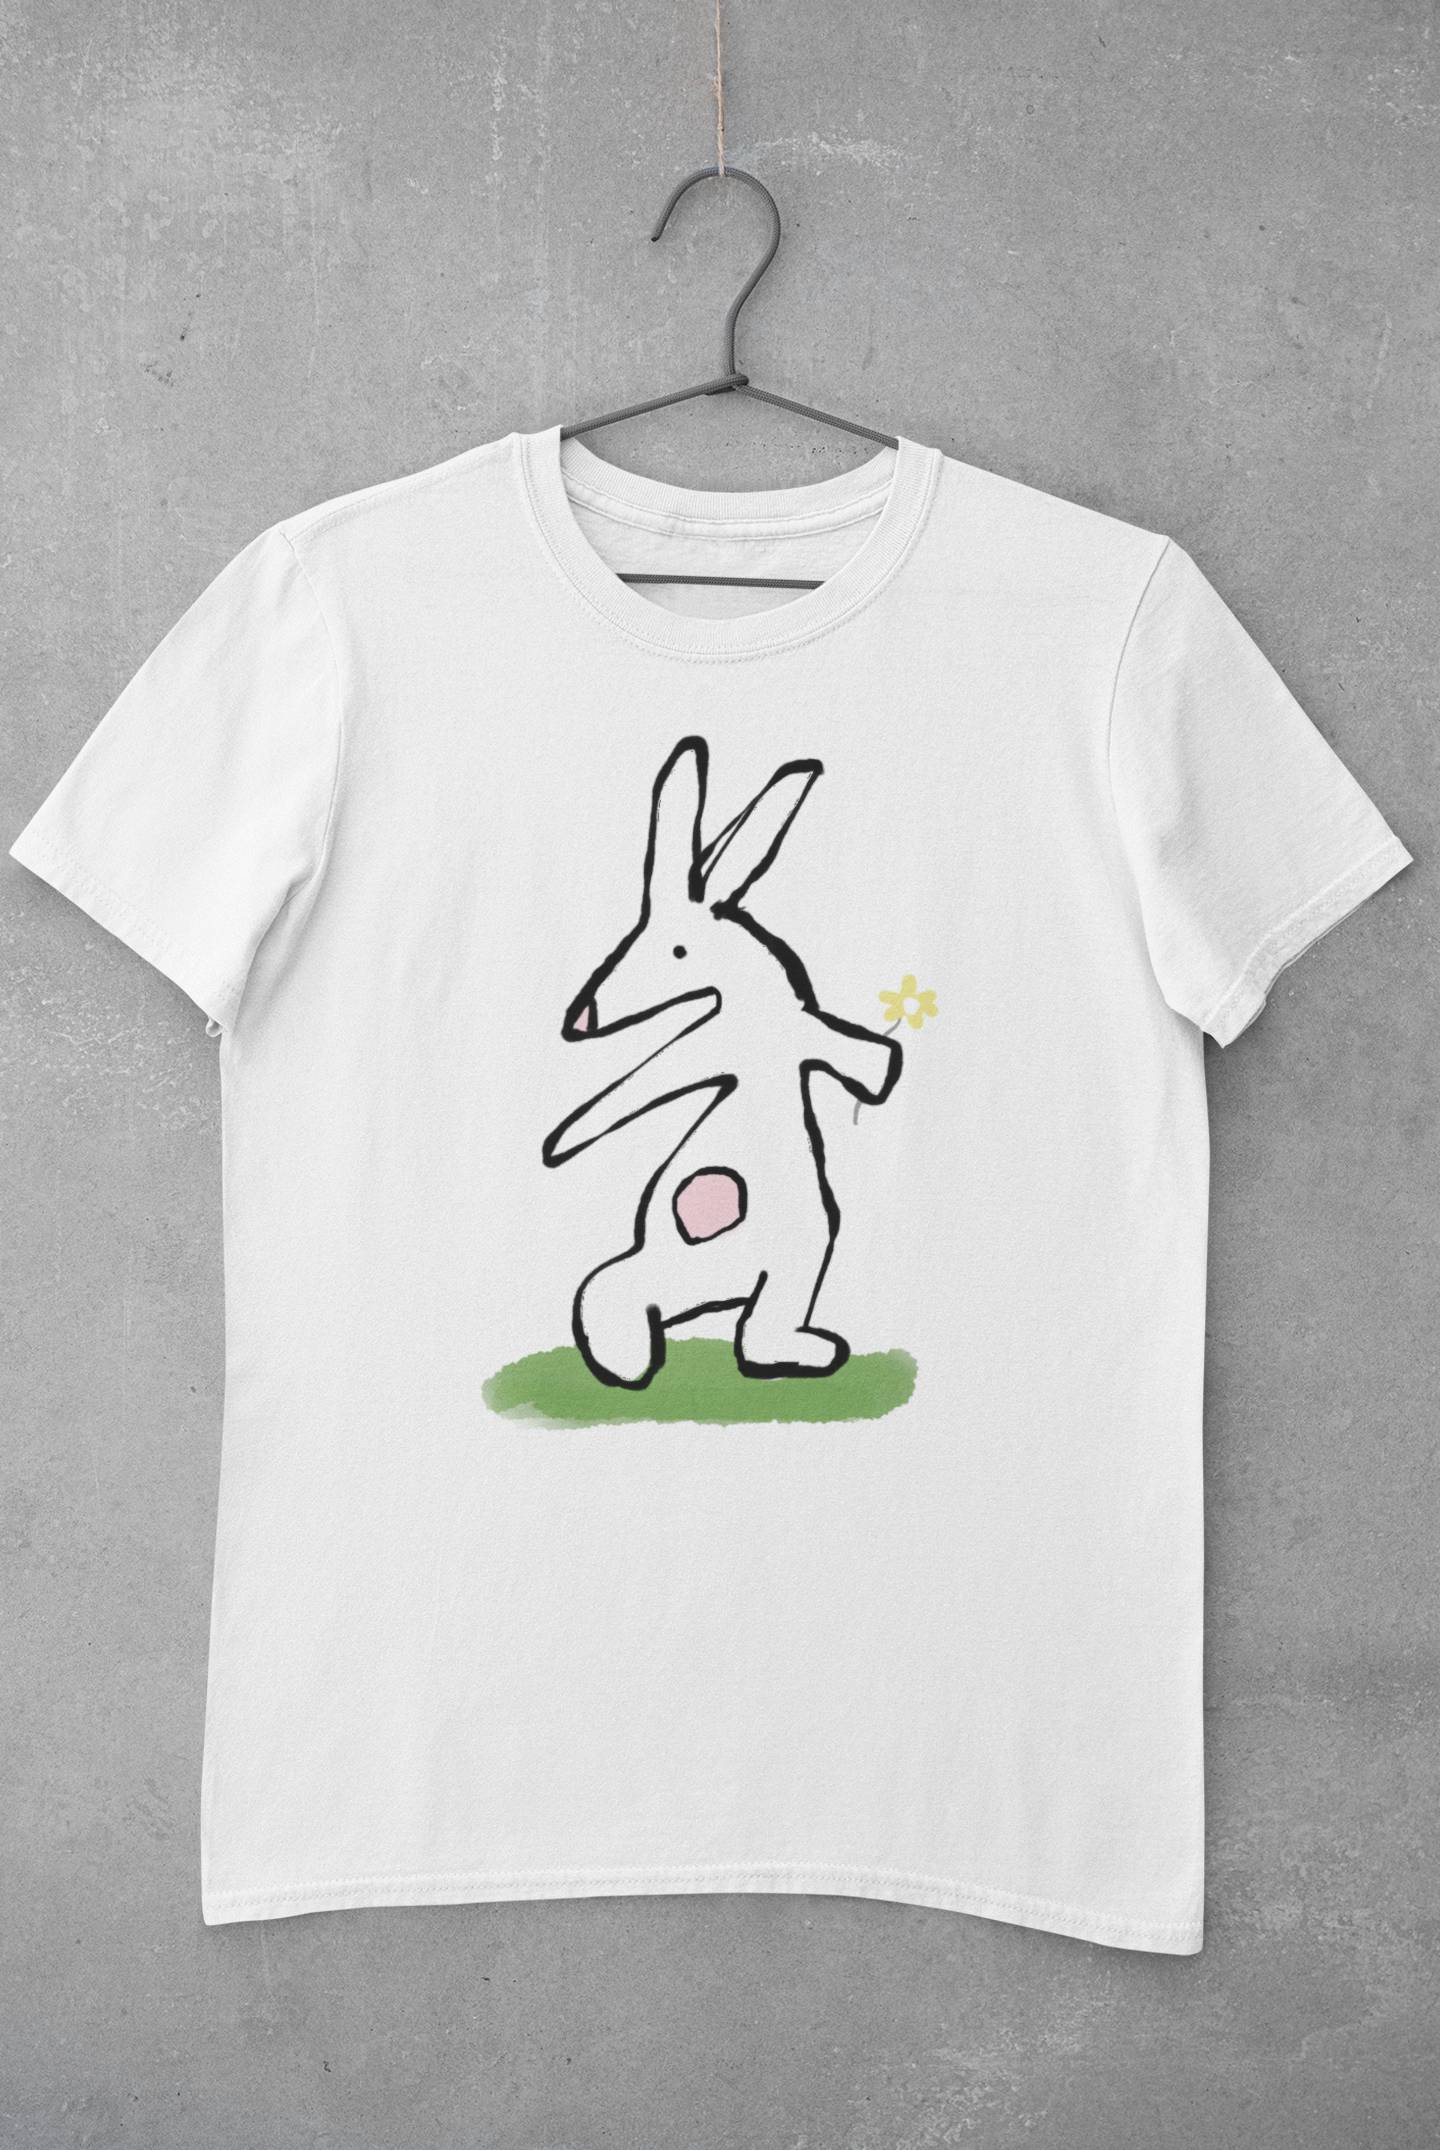 Bunny T-shirt - Illustrated rabbit holding a flower design on white vegan cotton - Easter Bunny t-shirts by Hector and Bone